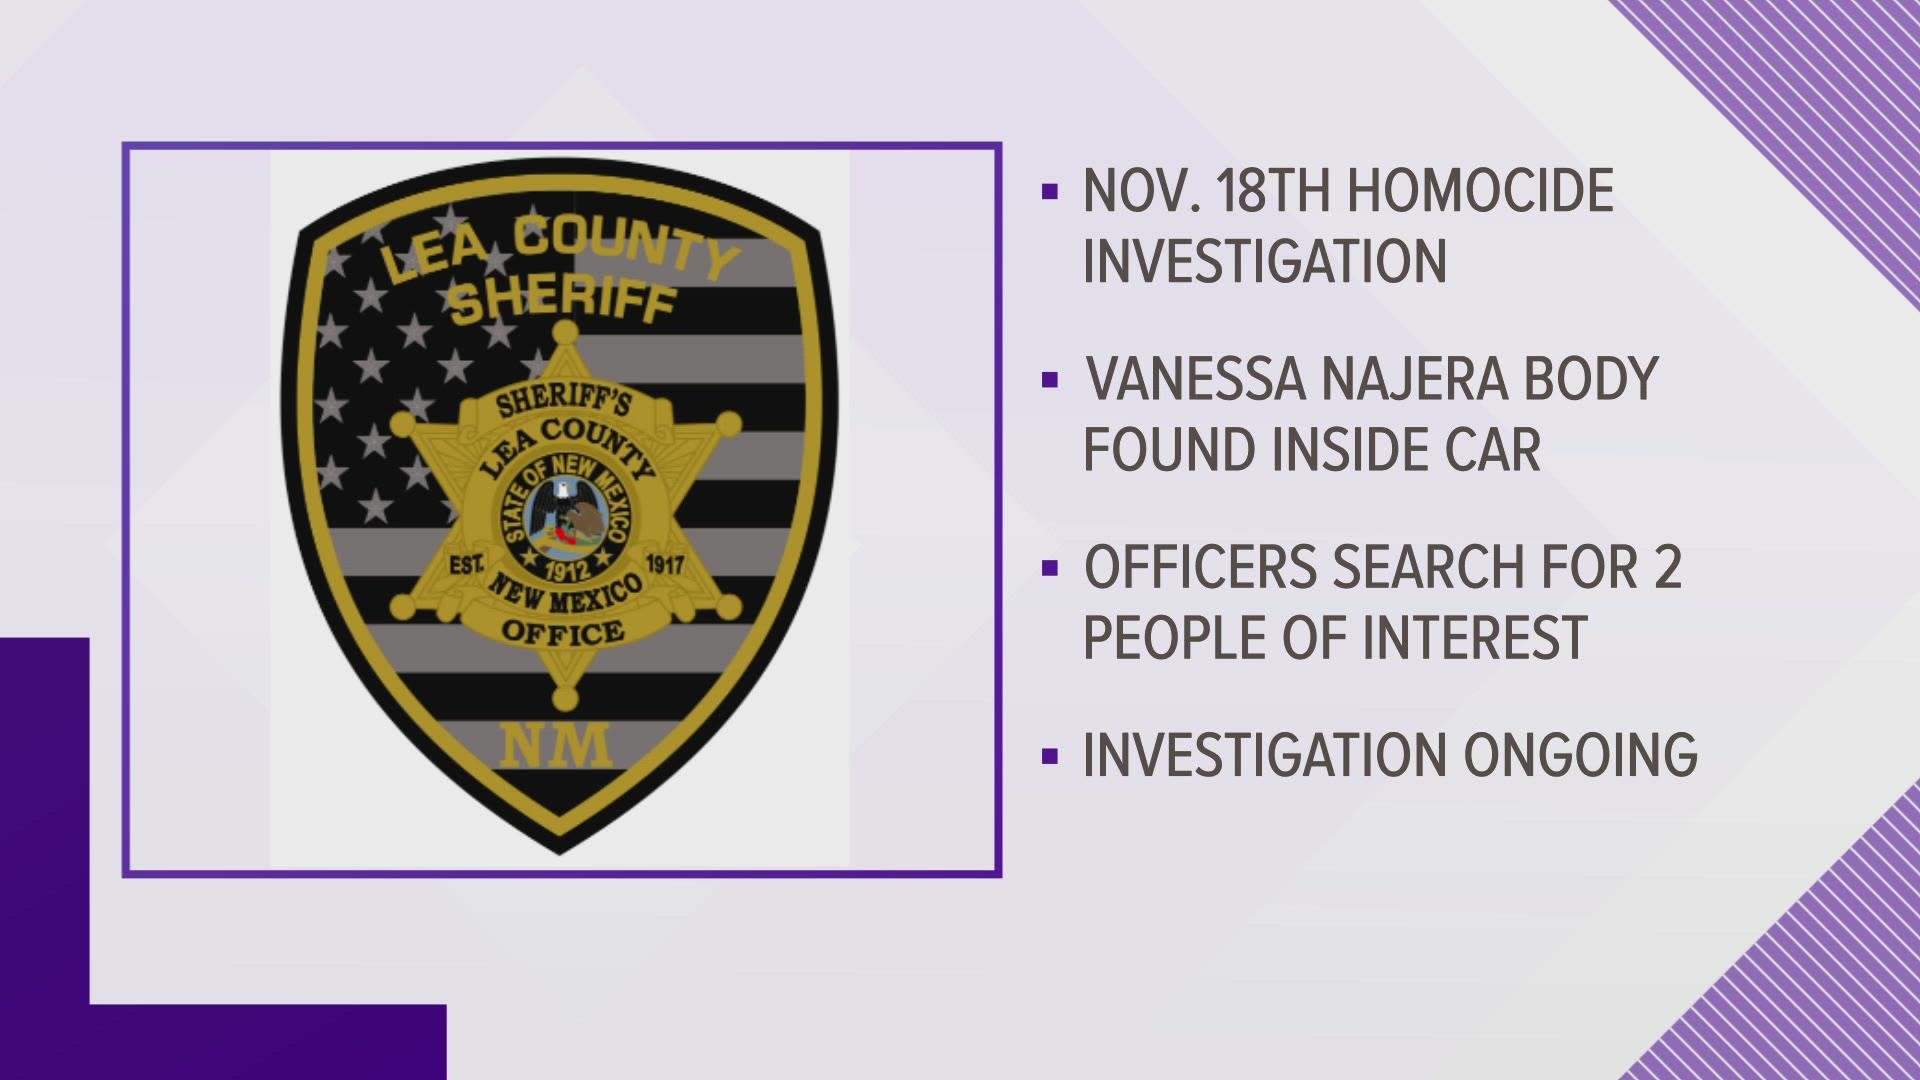 29-year-old Vanessa Najera was found deceased inside her vehicle by LCSO deputies on November 18.